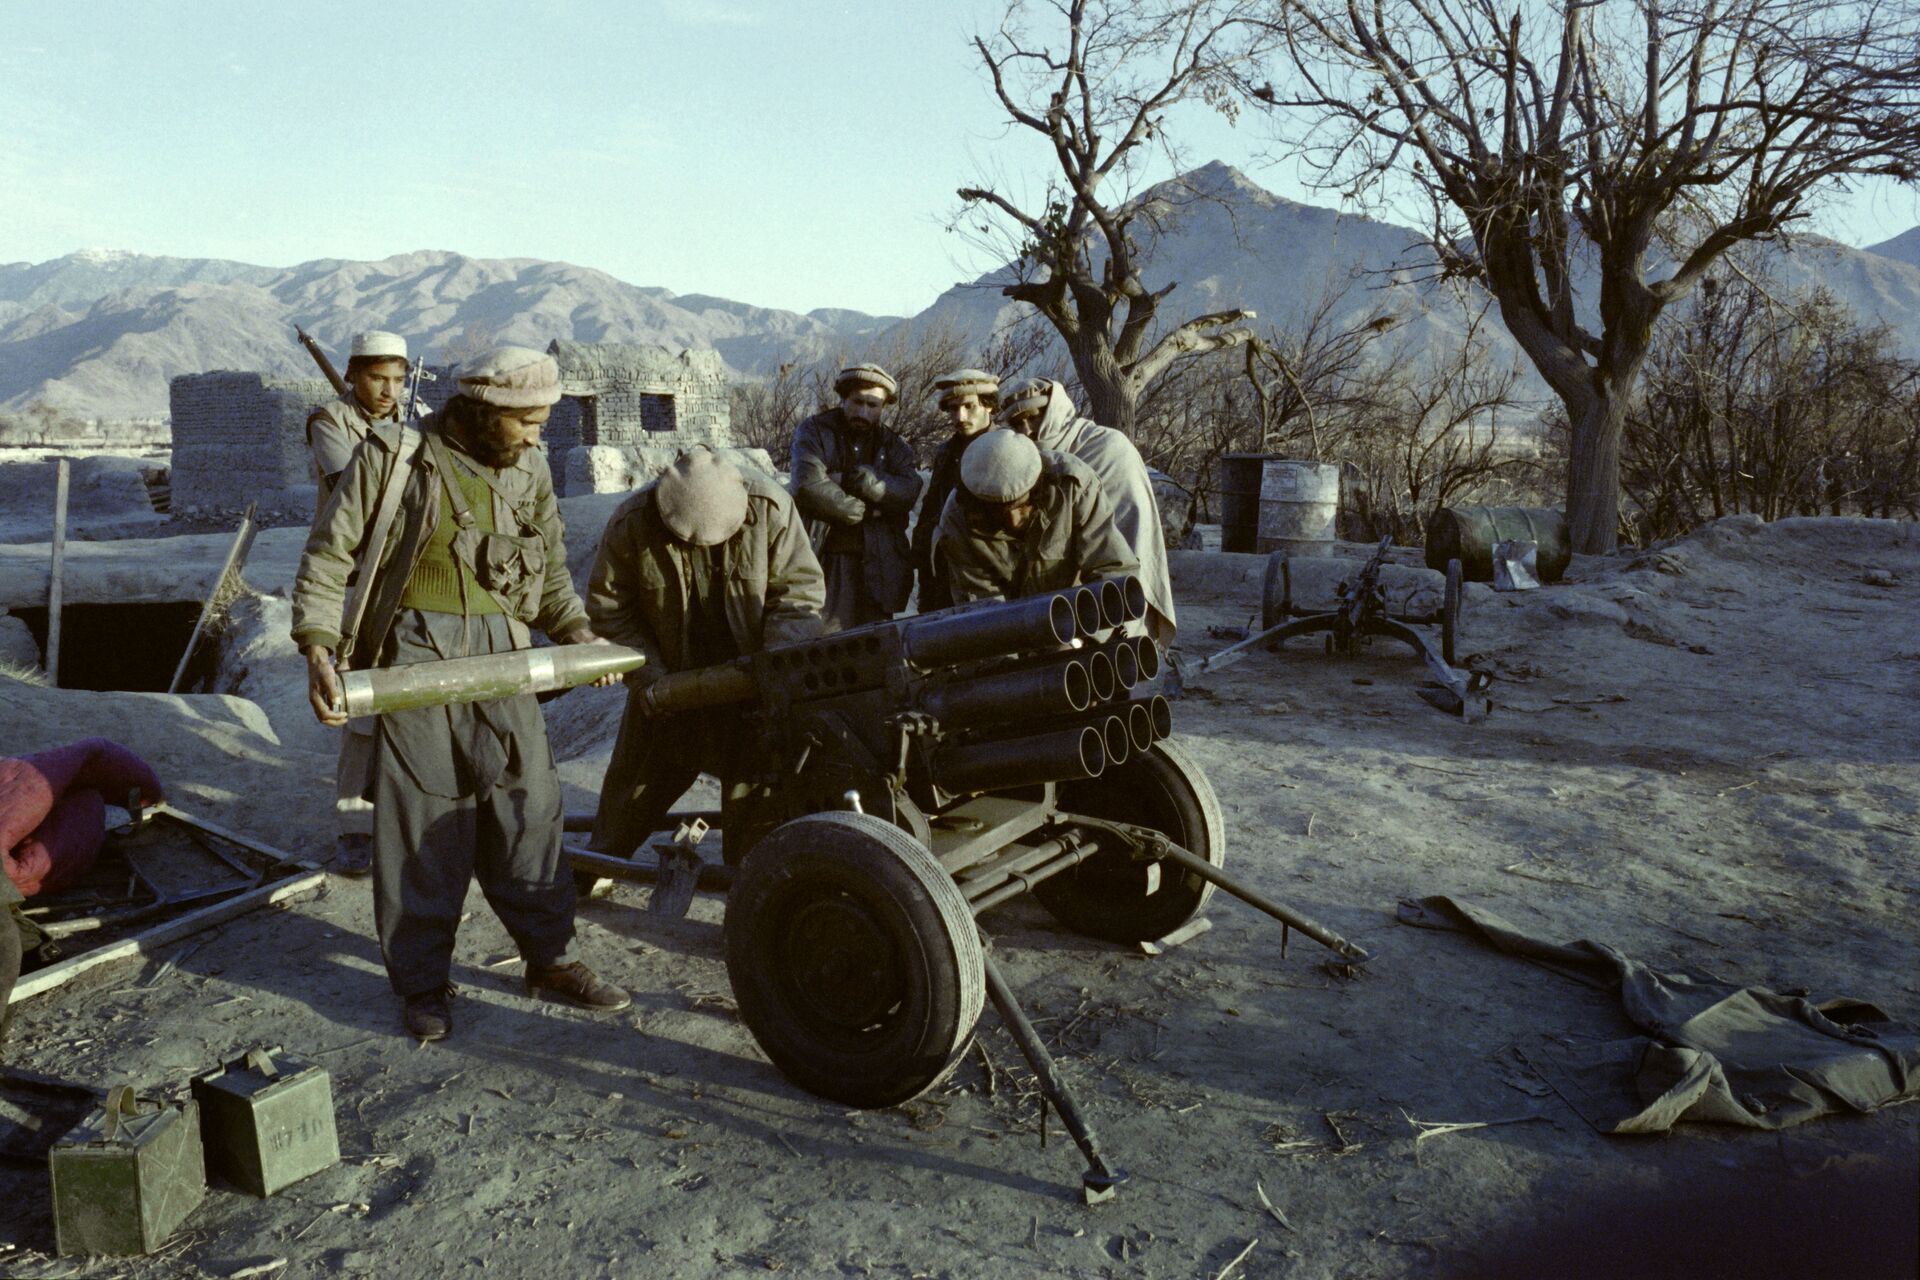 Afghan mujahideen prepare a rocket attack on the government troops in Shaga, Eastern Nangarhar province, on January 15, 1989 during the Afghan Civil War opposing the Islamic Unity of Afghanistan Mujahideen and the Democratic Republic of Afghanistan (DRA) supported by Soviet Union - Sputnik International, 1920, 08.09.2021